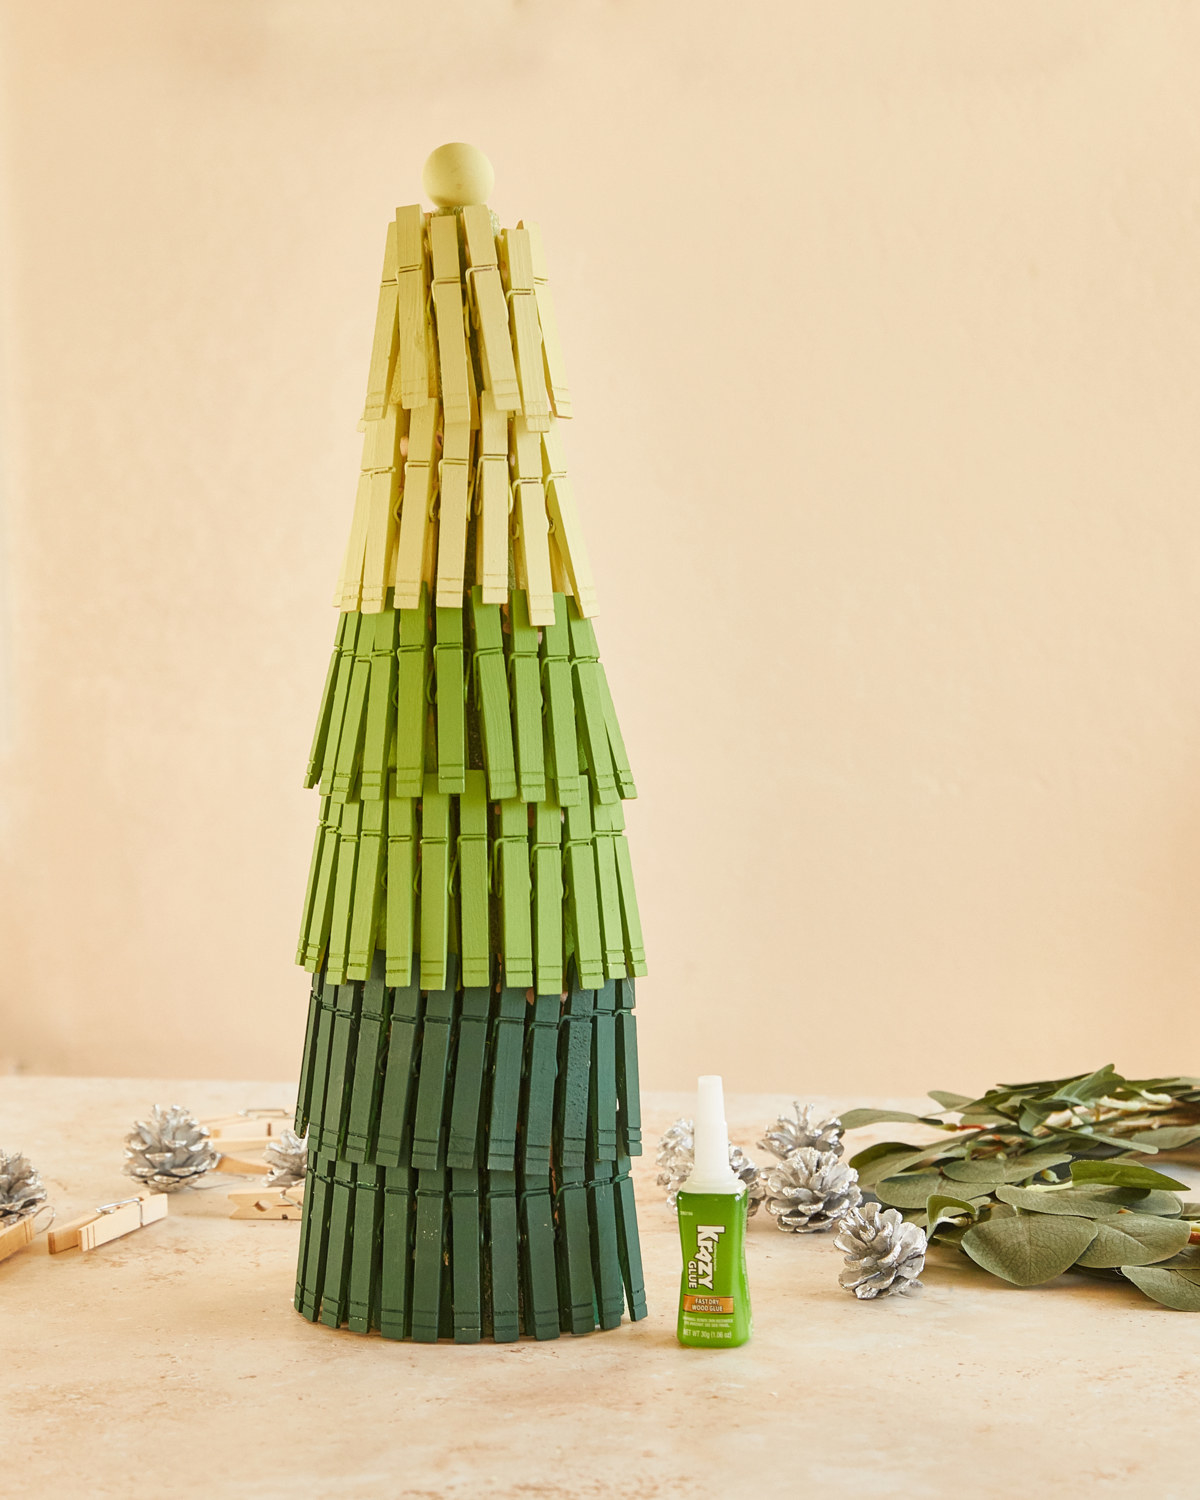 Completed clothespin tree with dark and light green clothespins. Bottle of Krazy Glue off to the side.